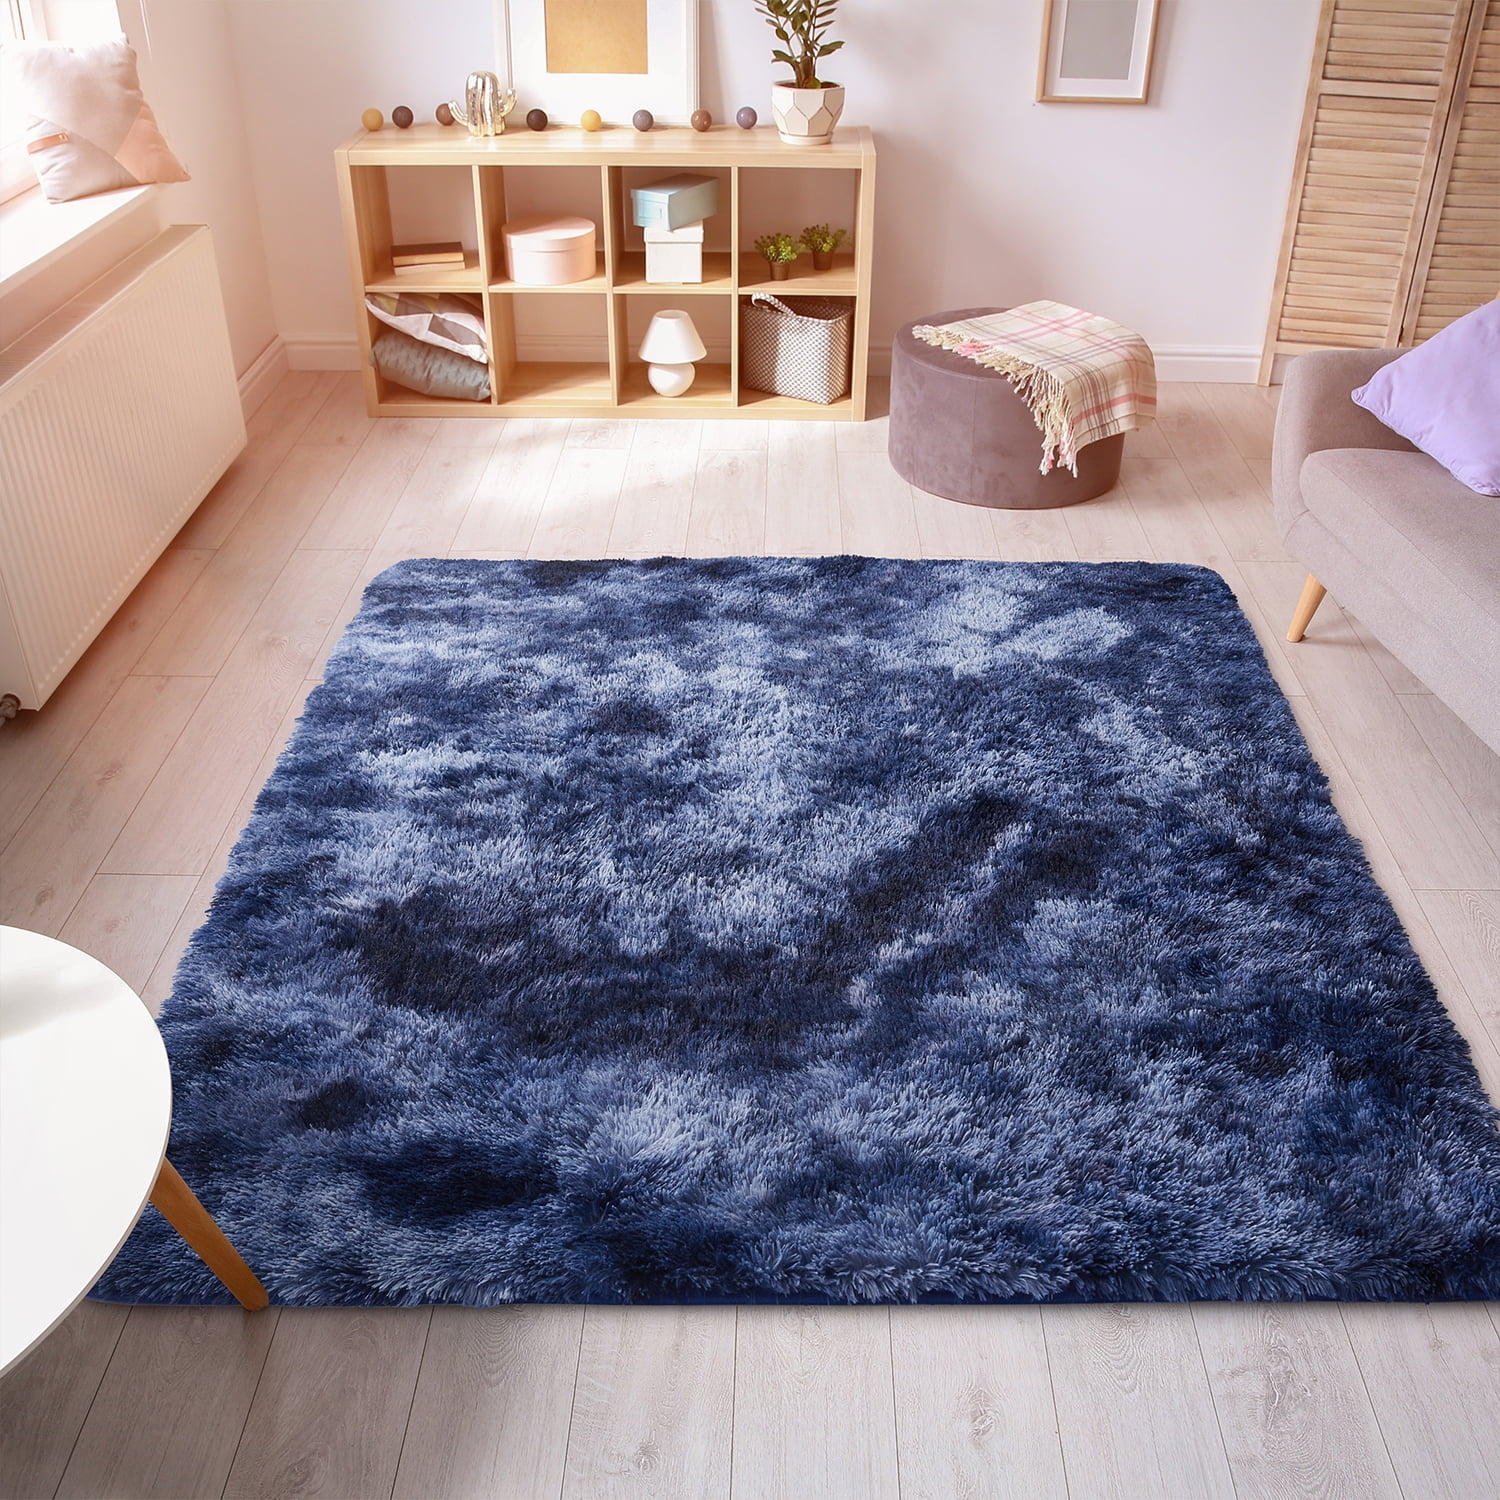 Royal Navy Blue Shaggy Rug Warm Non Shed Transitional Living Room Rugs Runners 